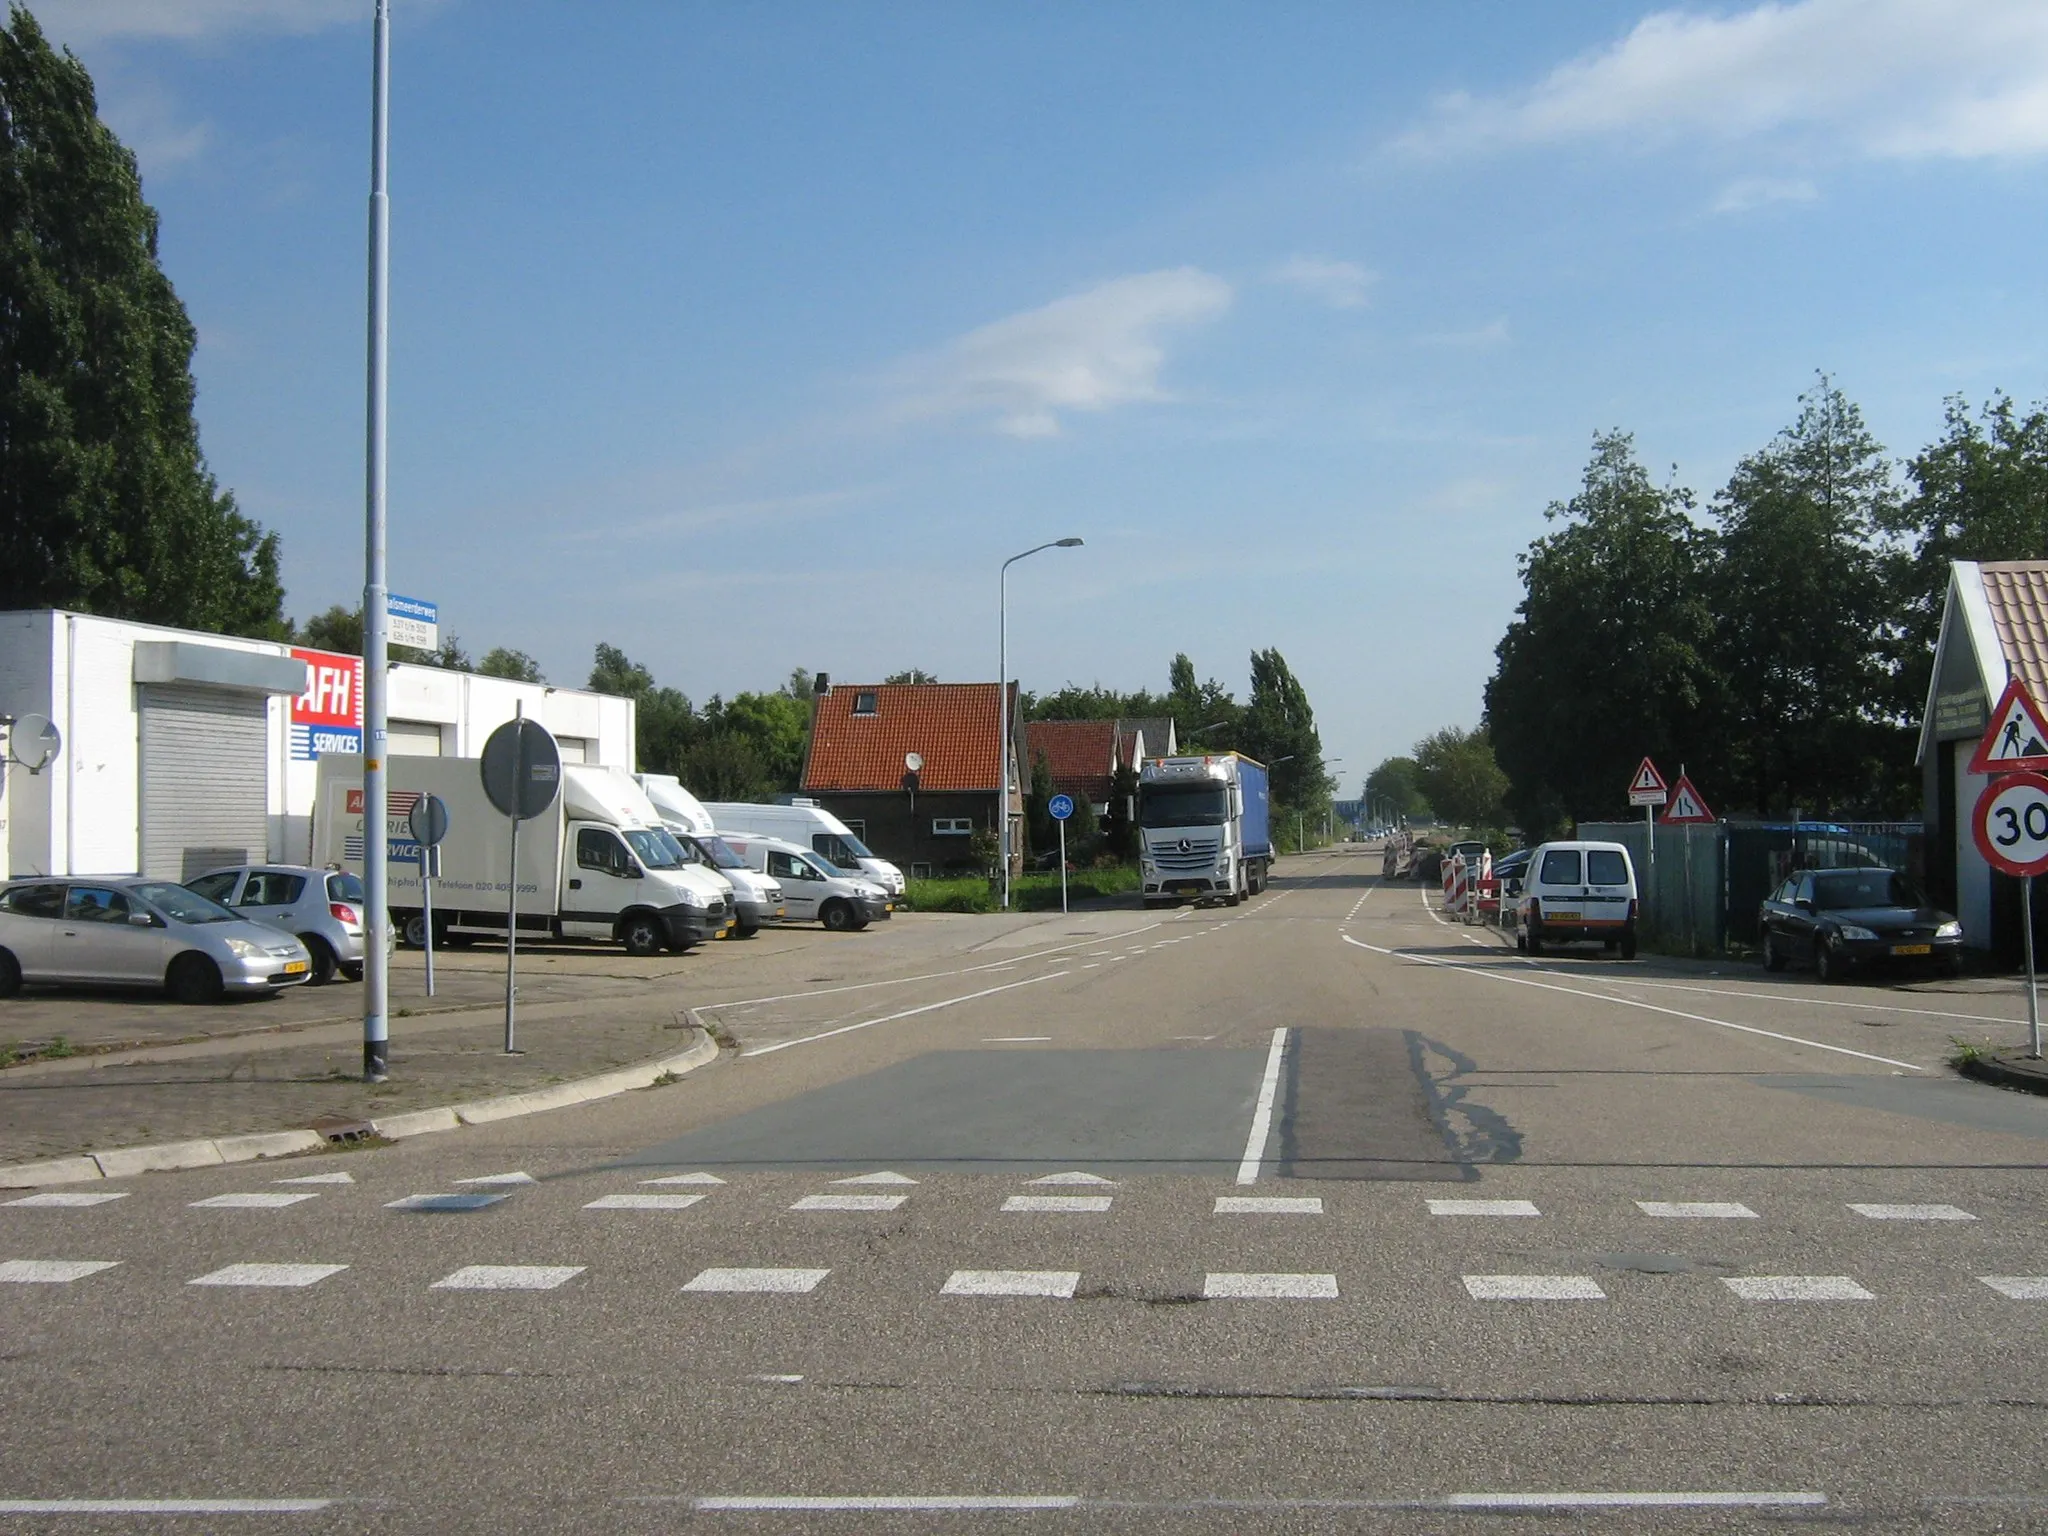 Photo showing: Buildings in the village of Rozenburg, Haarlemmermeer municipality, the Netherlands, looking northeast from the intersection of the Aalsmeerderweg (away from photographer) and the Kruisweg (N196).